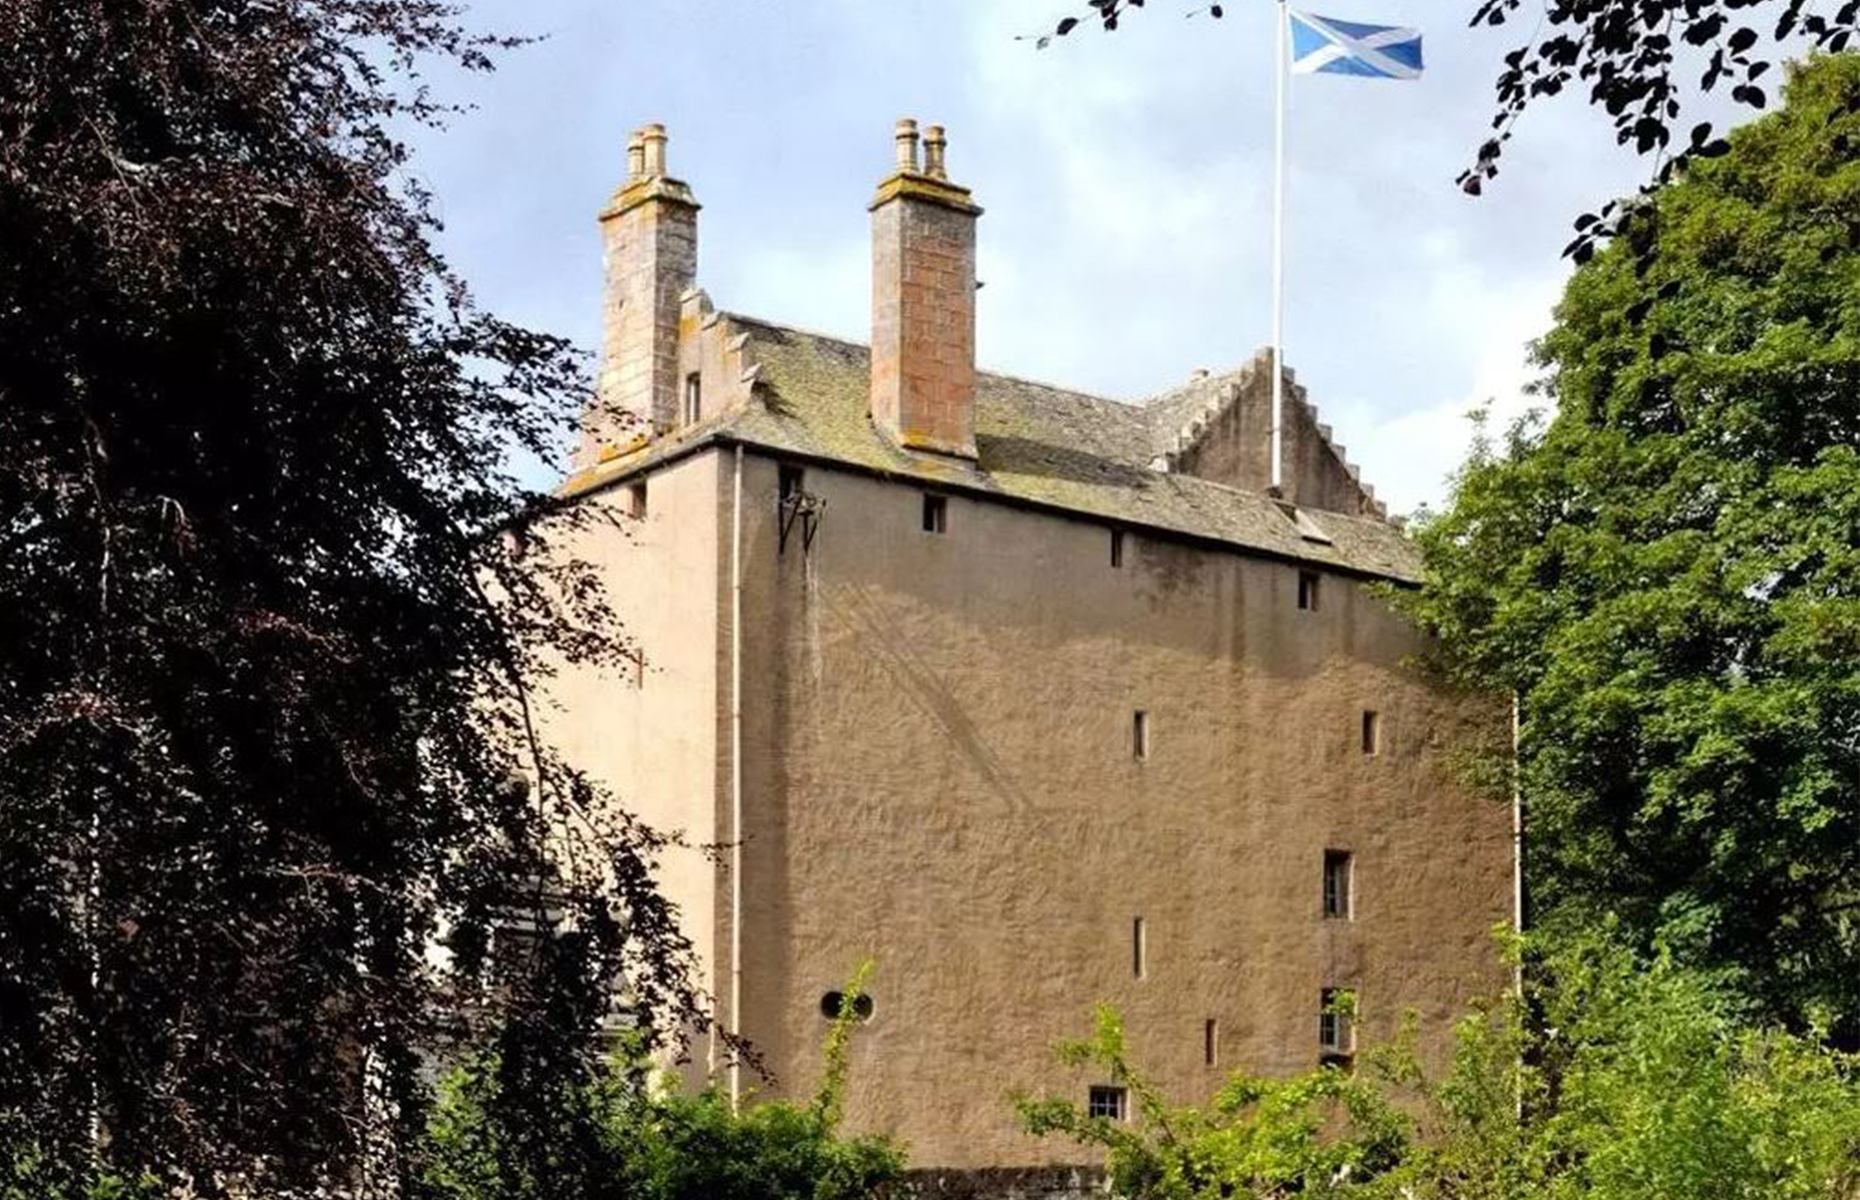 You can buy this 18th-century castle for less than a London flat